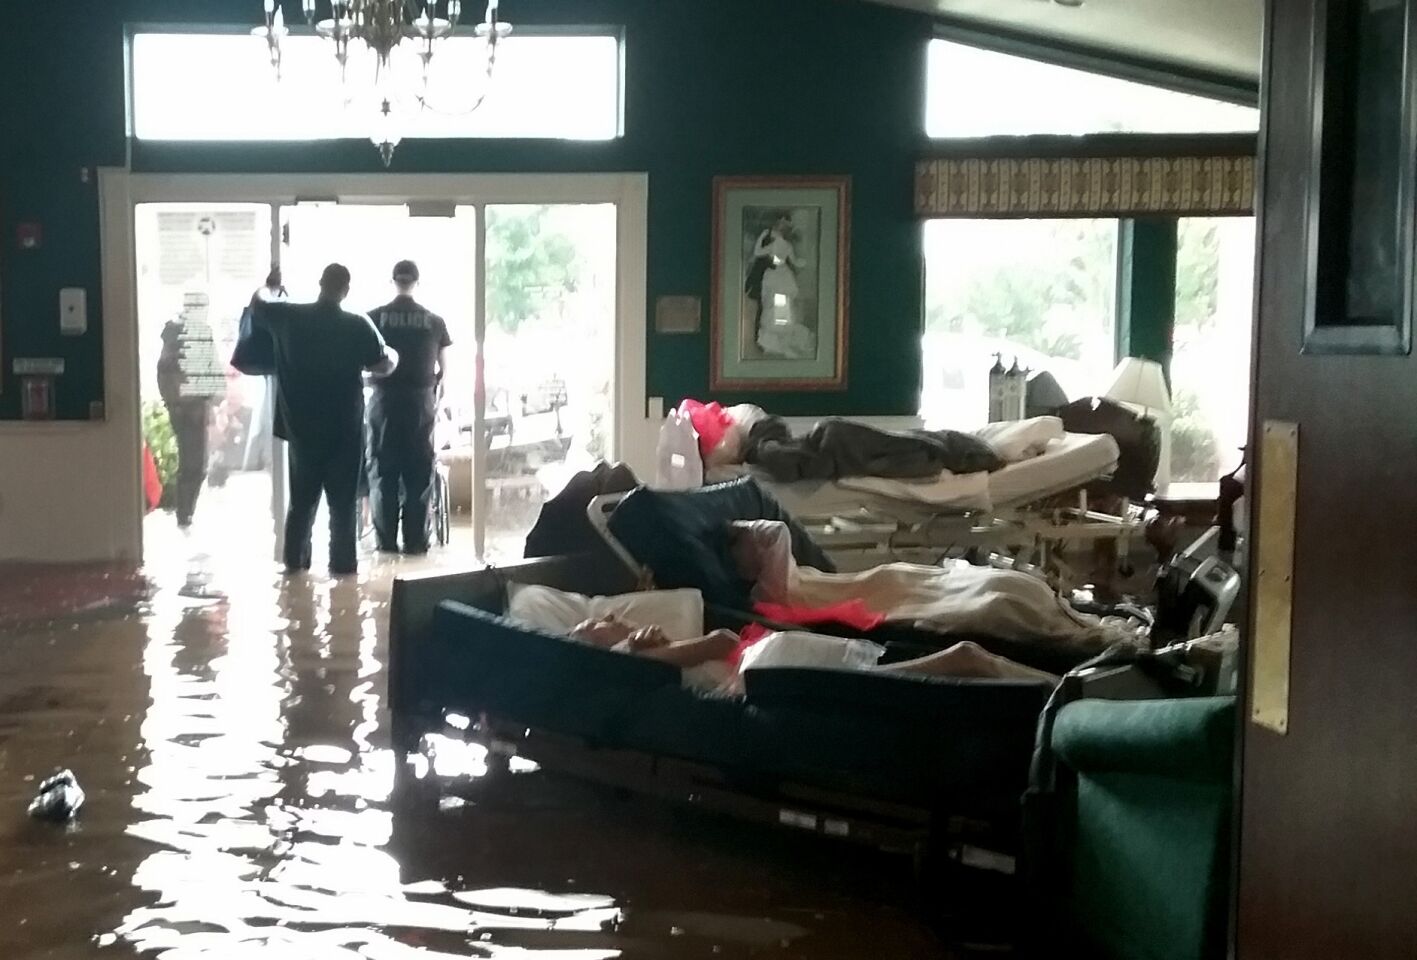 Severe flooding in Texas